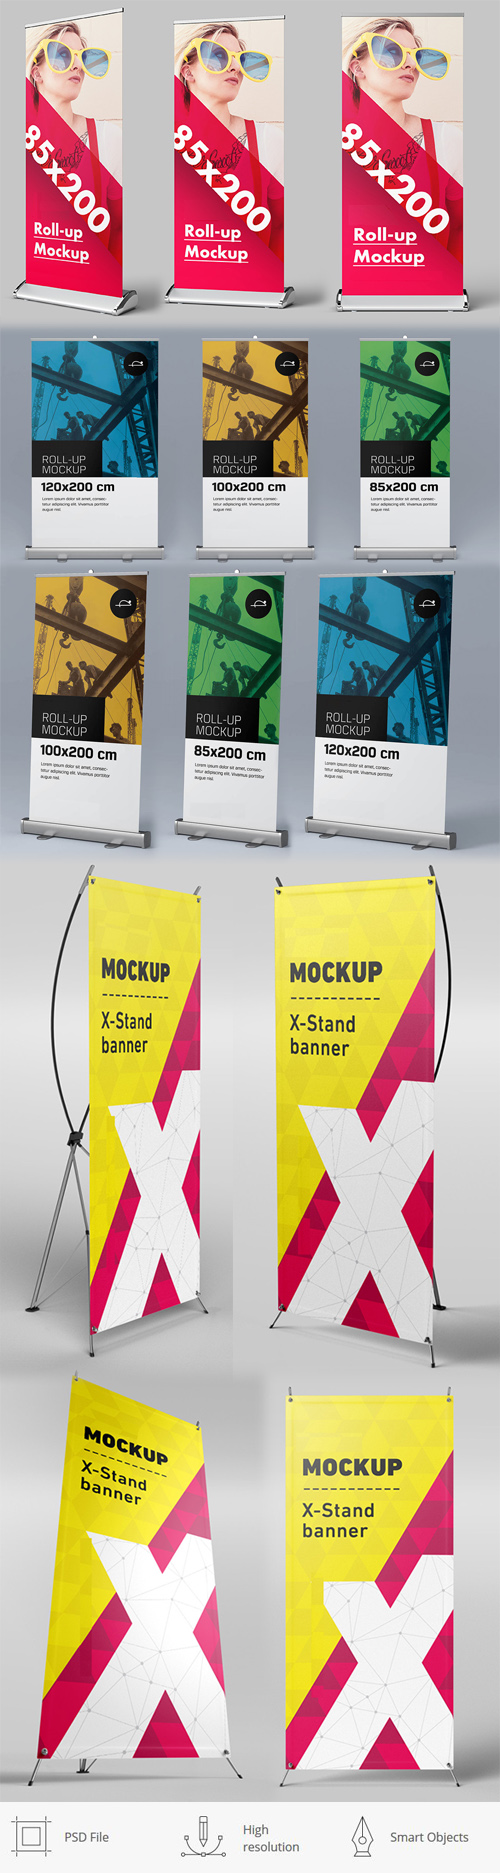 Roll-up & X-Stand Banners PSD Mockups Templates